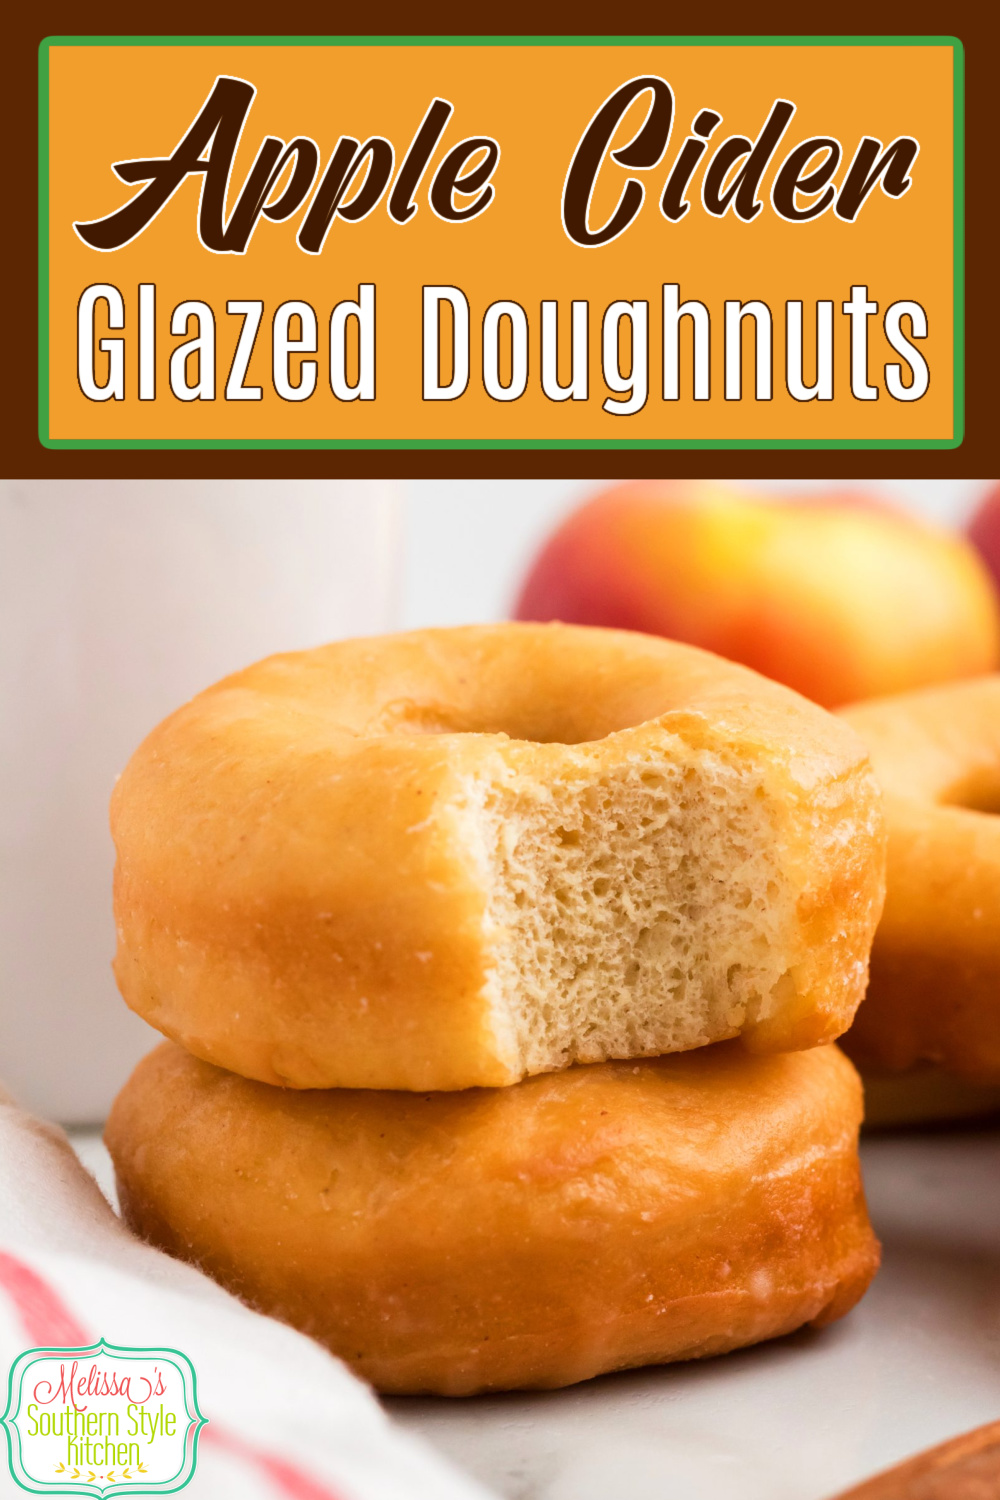 These fluffy Apple Cider Glazed Doughnuts coated in a sweet apple cider glaze are soft on the inside with a slightly crunchy exterior #appleciderdoughnuts #doughnutrecipes #appledonuts #donuts #donutrecipes #easydoughnuts #frieddoughuts via @melissasssk